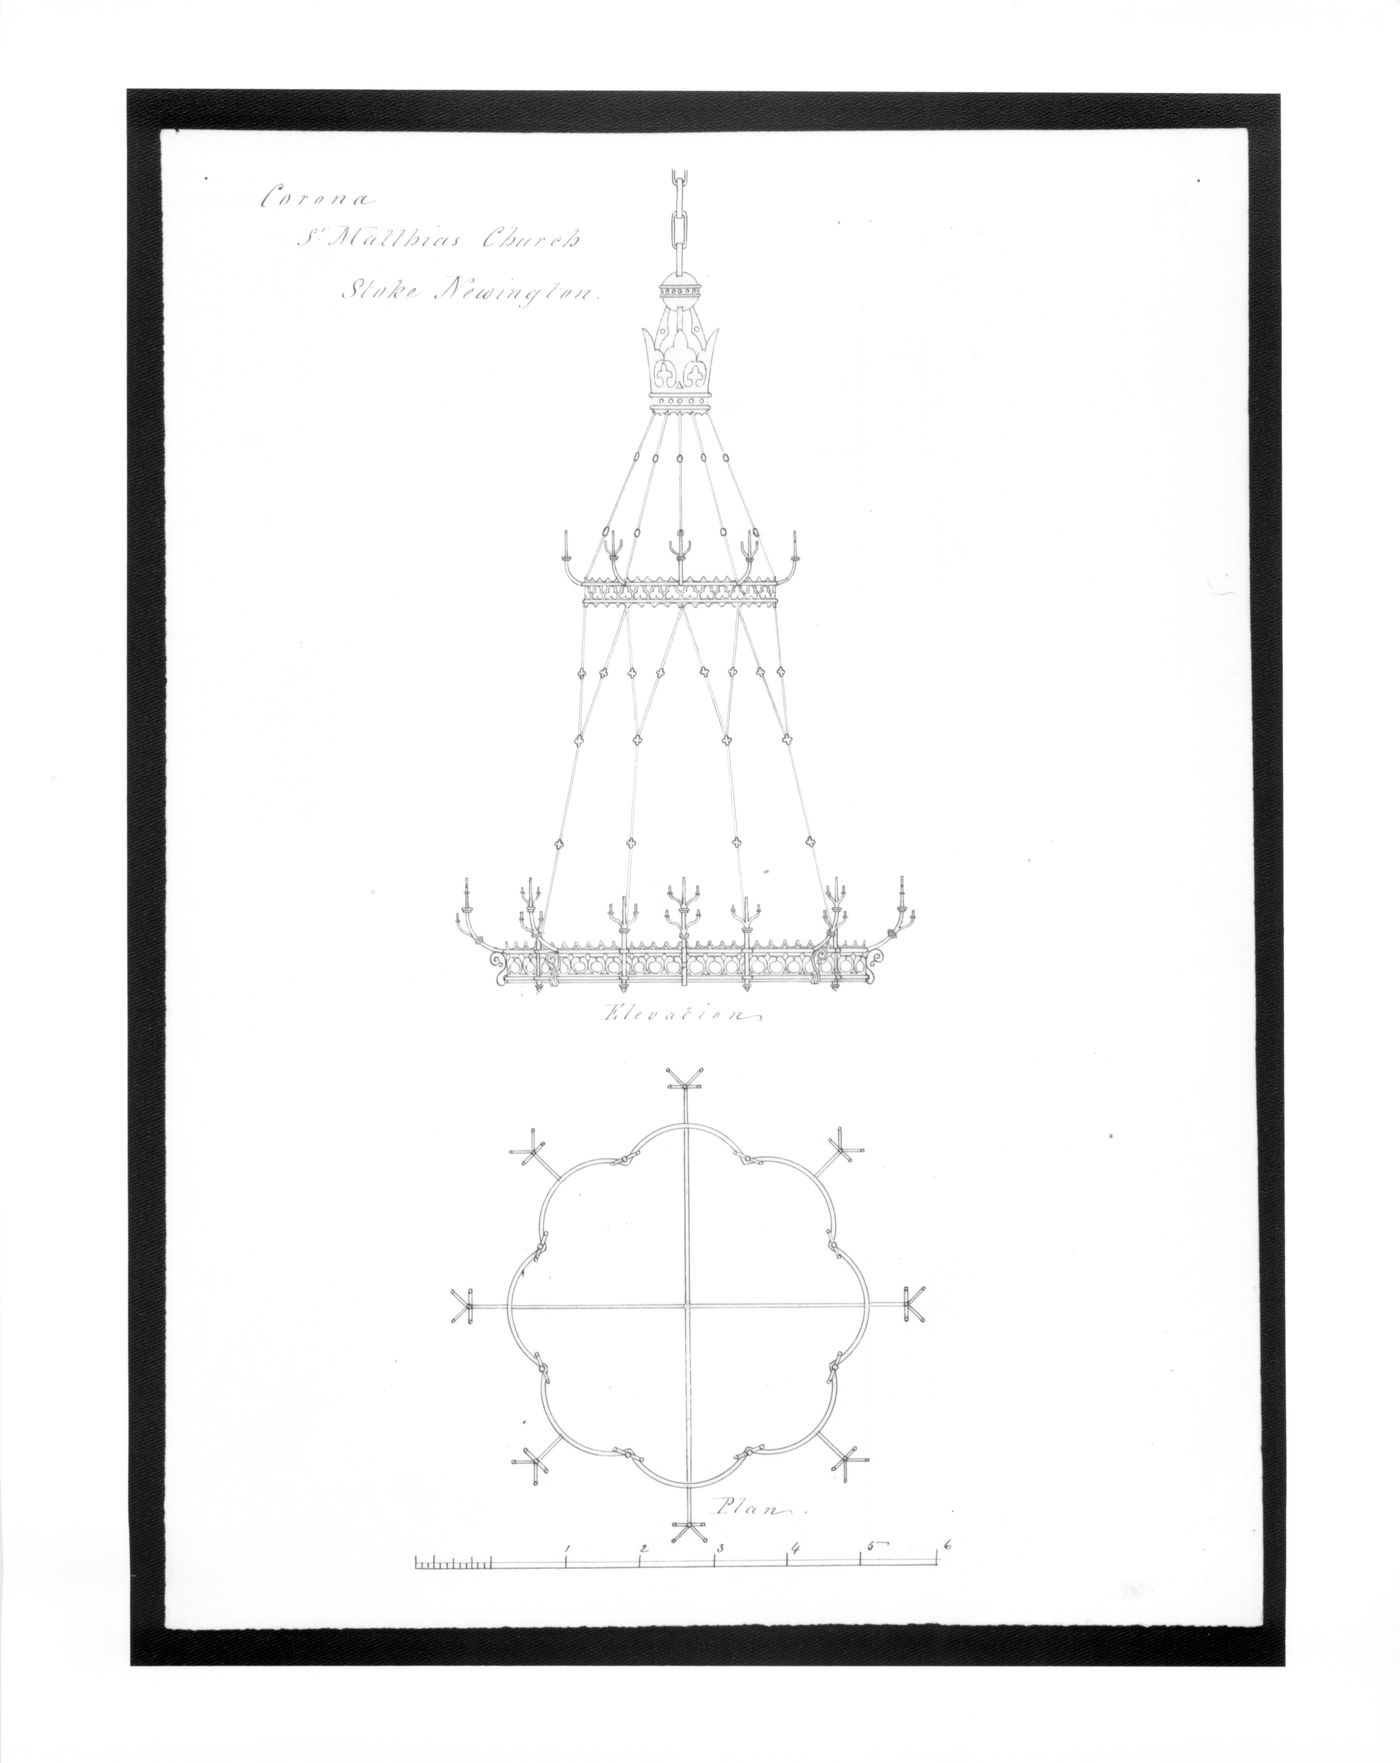 Plan and elevation of a suspended candelabra (corona) for the Church of St. Matthias, Stoke Newington, London